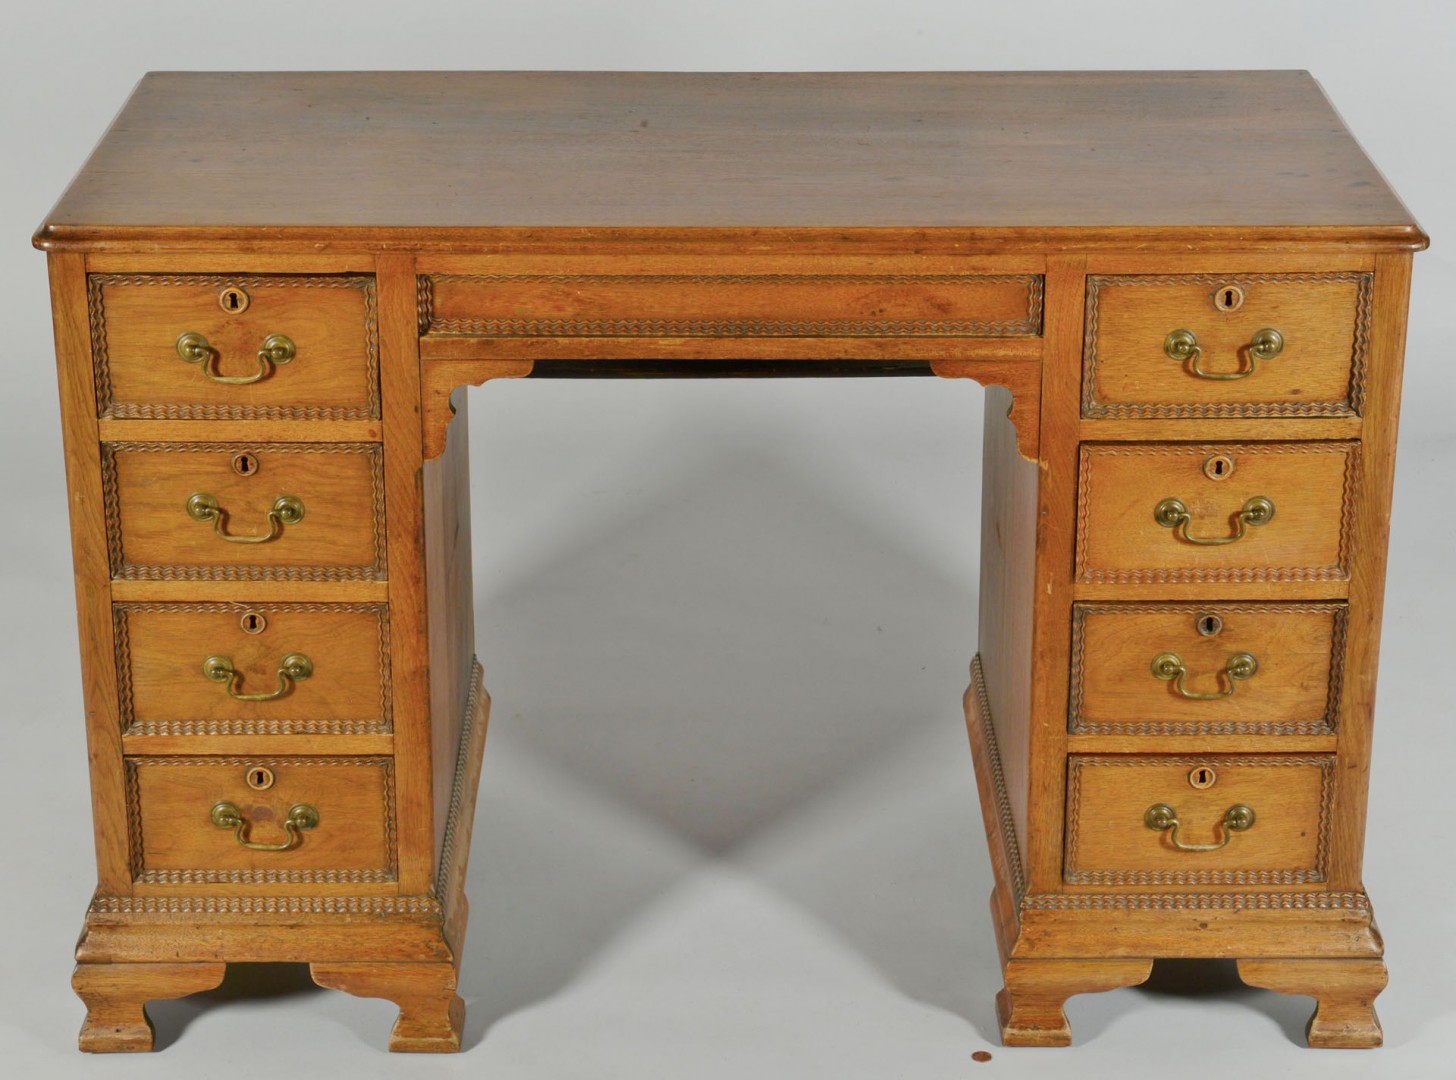 Lot 574: Late 19th century Doctor's Desk, Knoxville history